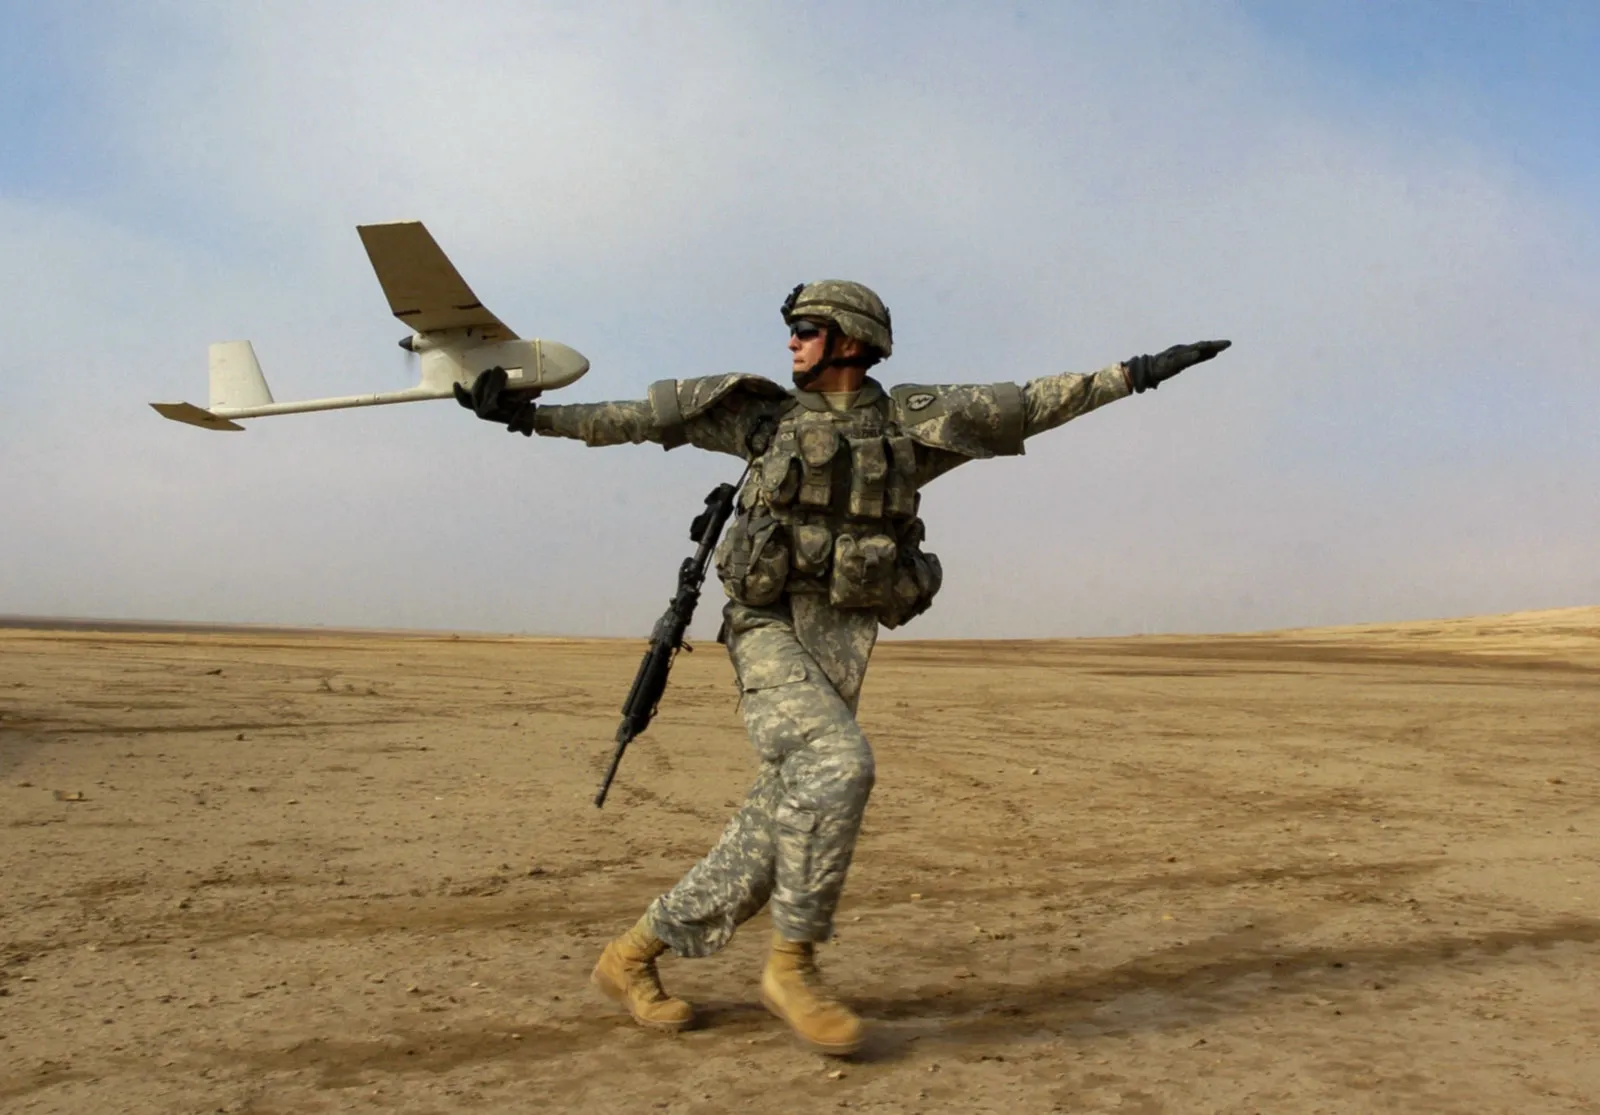 What Is The Primary Use Of A Military Drone